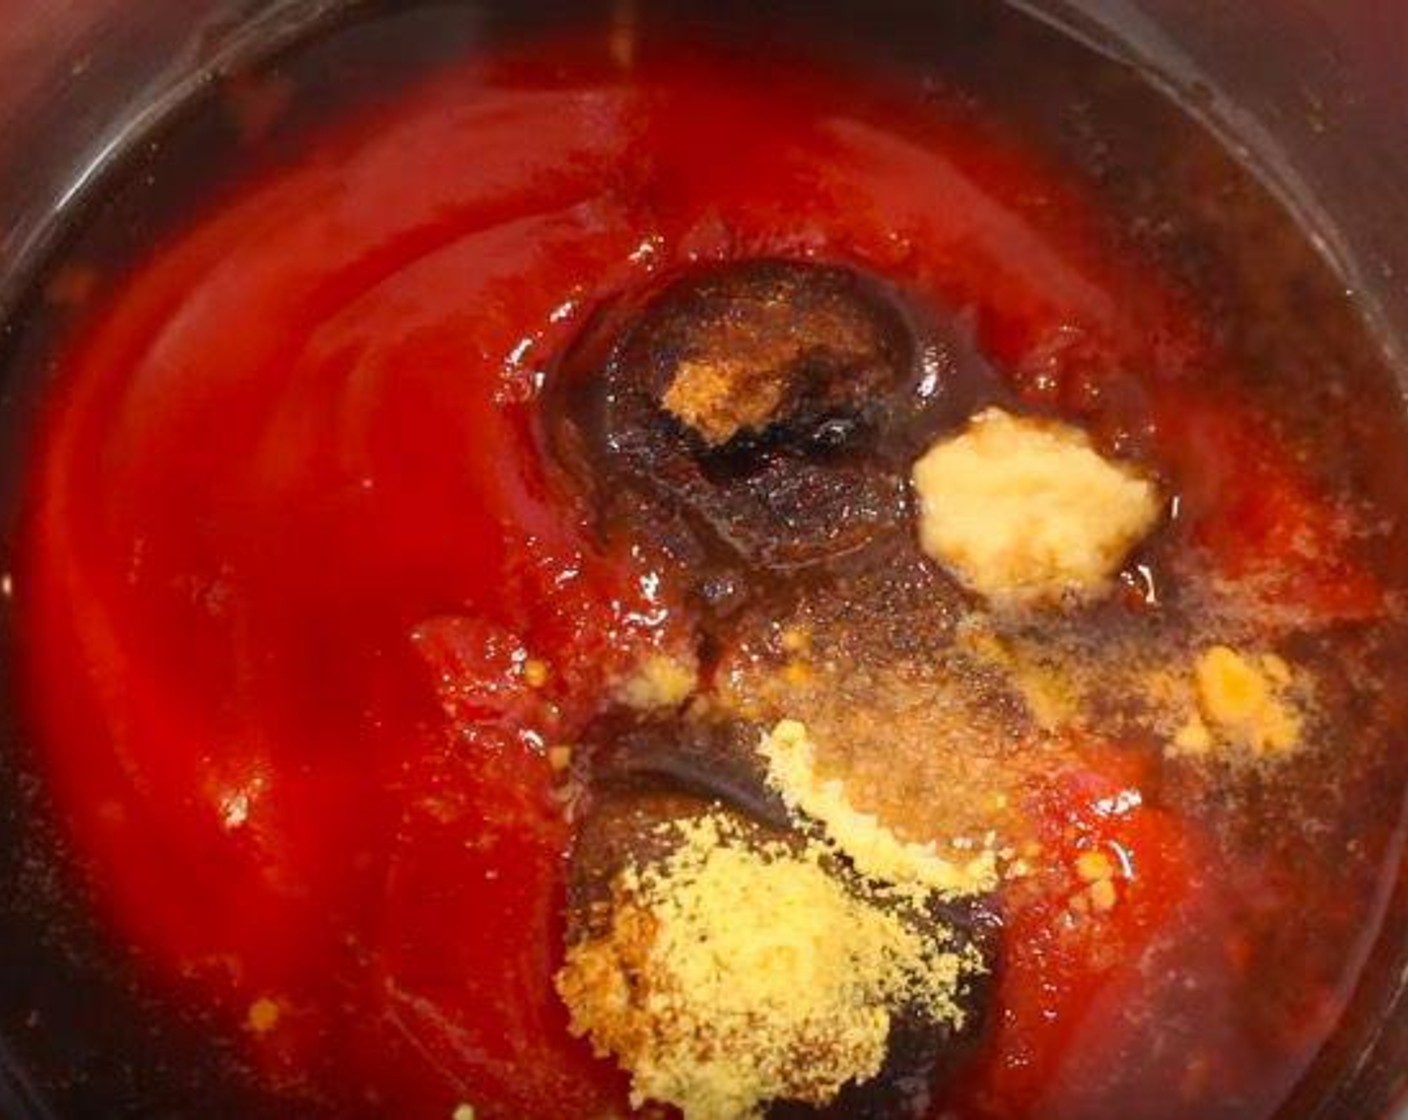 step 3 In a small saucepan over medium heat, add Ketchup (1/2 cup), Brown Sugar (2 Tbsp), Worcestershire Sauce (2 Tbsp), Apple Cider Vinegar (1 Tbsp), Tabasco® Original Red Pepper Sauce (1/4 tsp), Dry Mustard (1/4 tsp), Salt (1/4 tsp), and Garlic (1 clove). Bring to a simmer and then reduce the temperature slightly. Remove from heat and allow to cool.